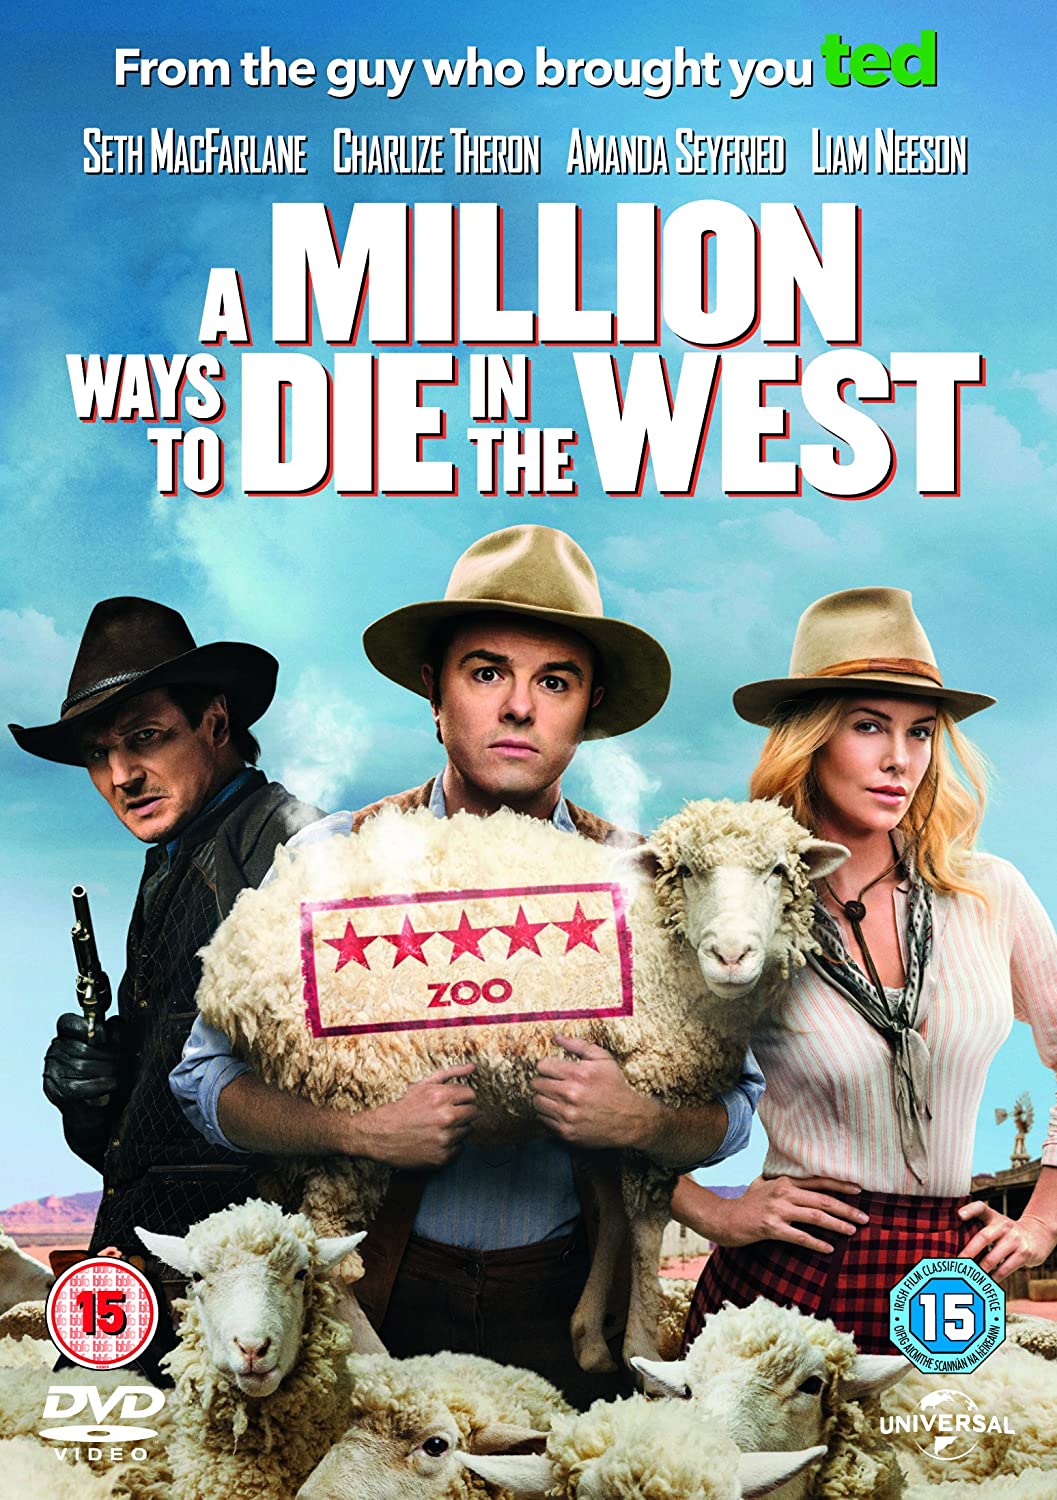 A Million Ways to Die in the West [2014] - Western/Comedy [DVD]